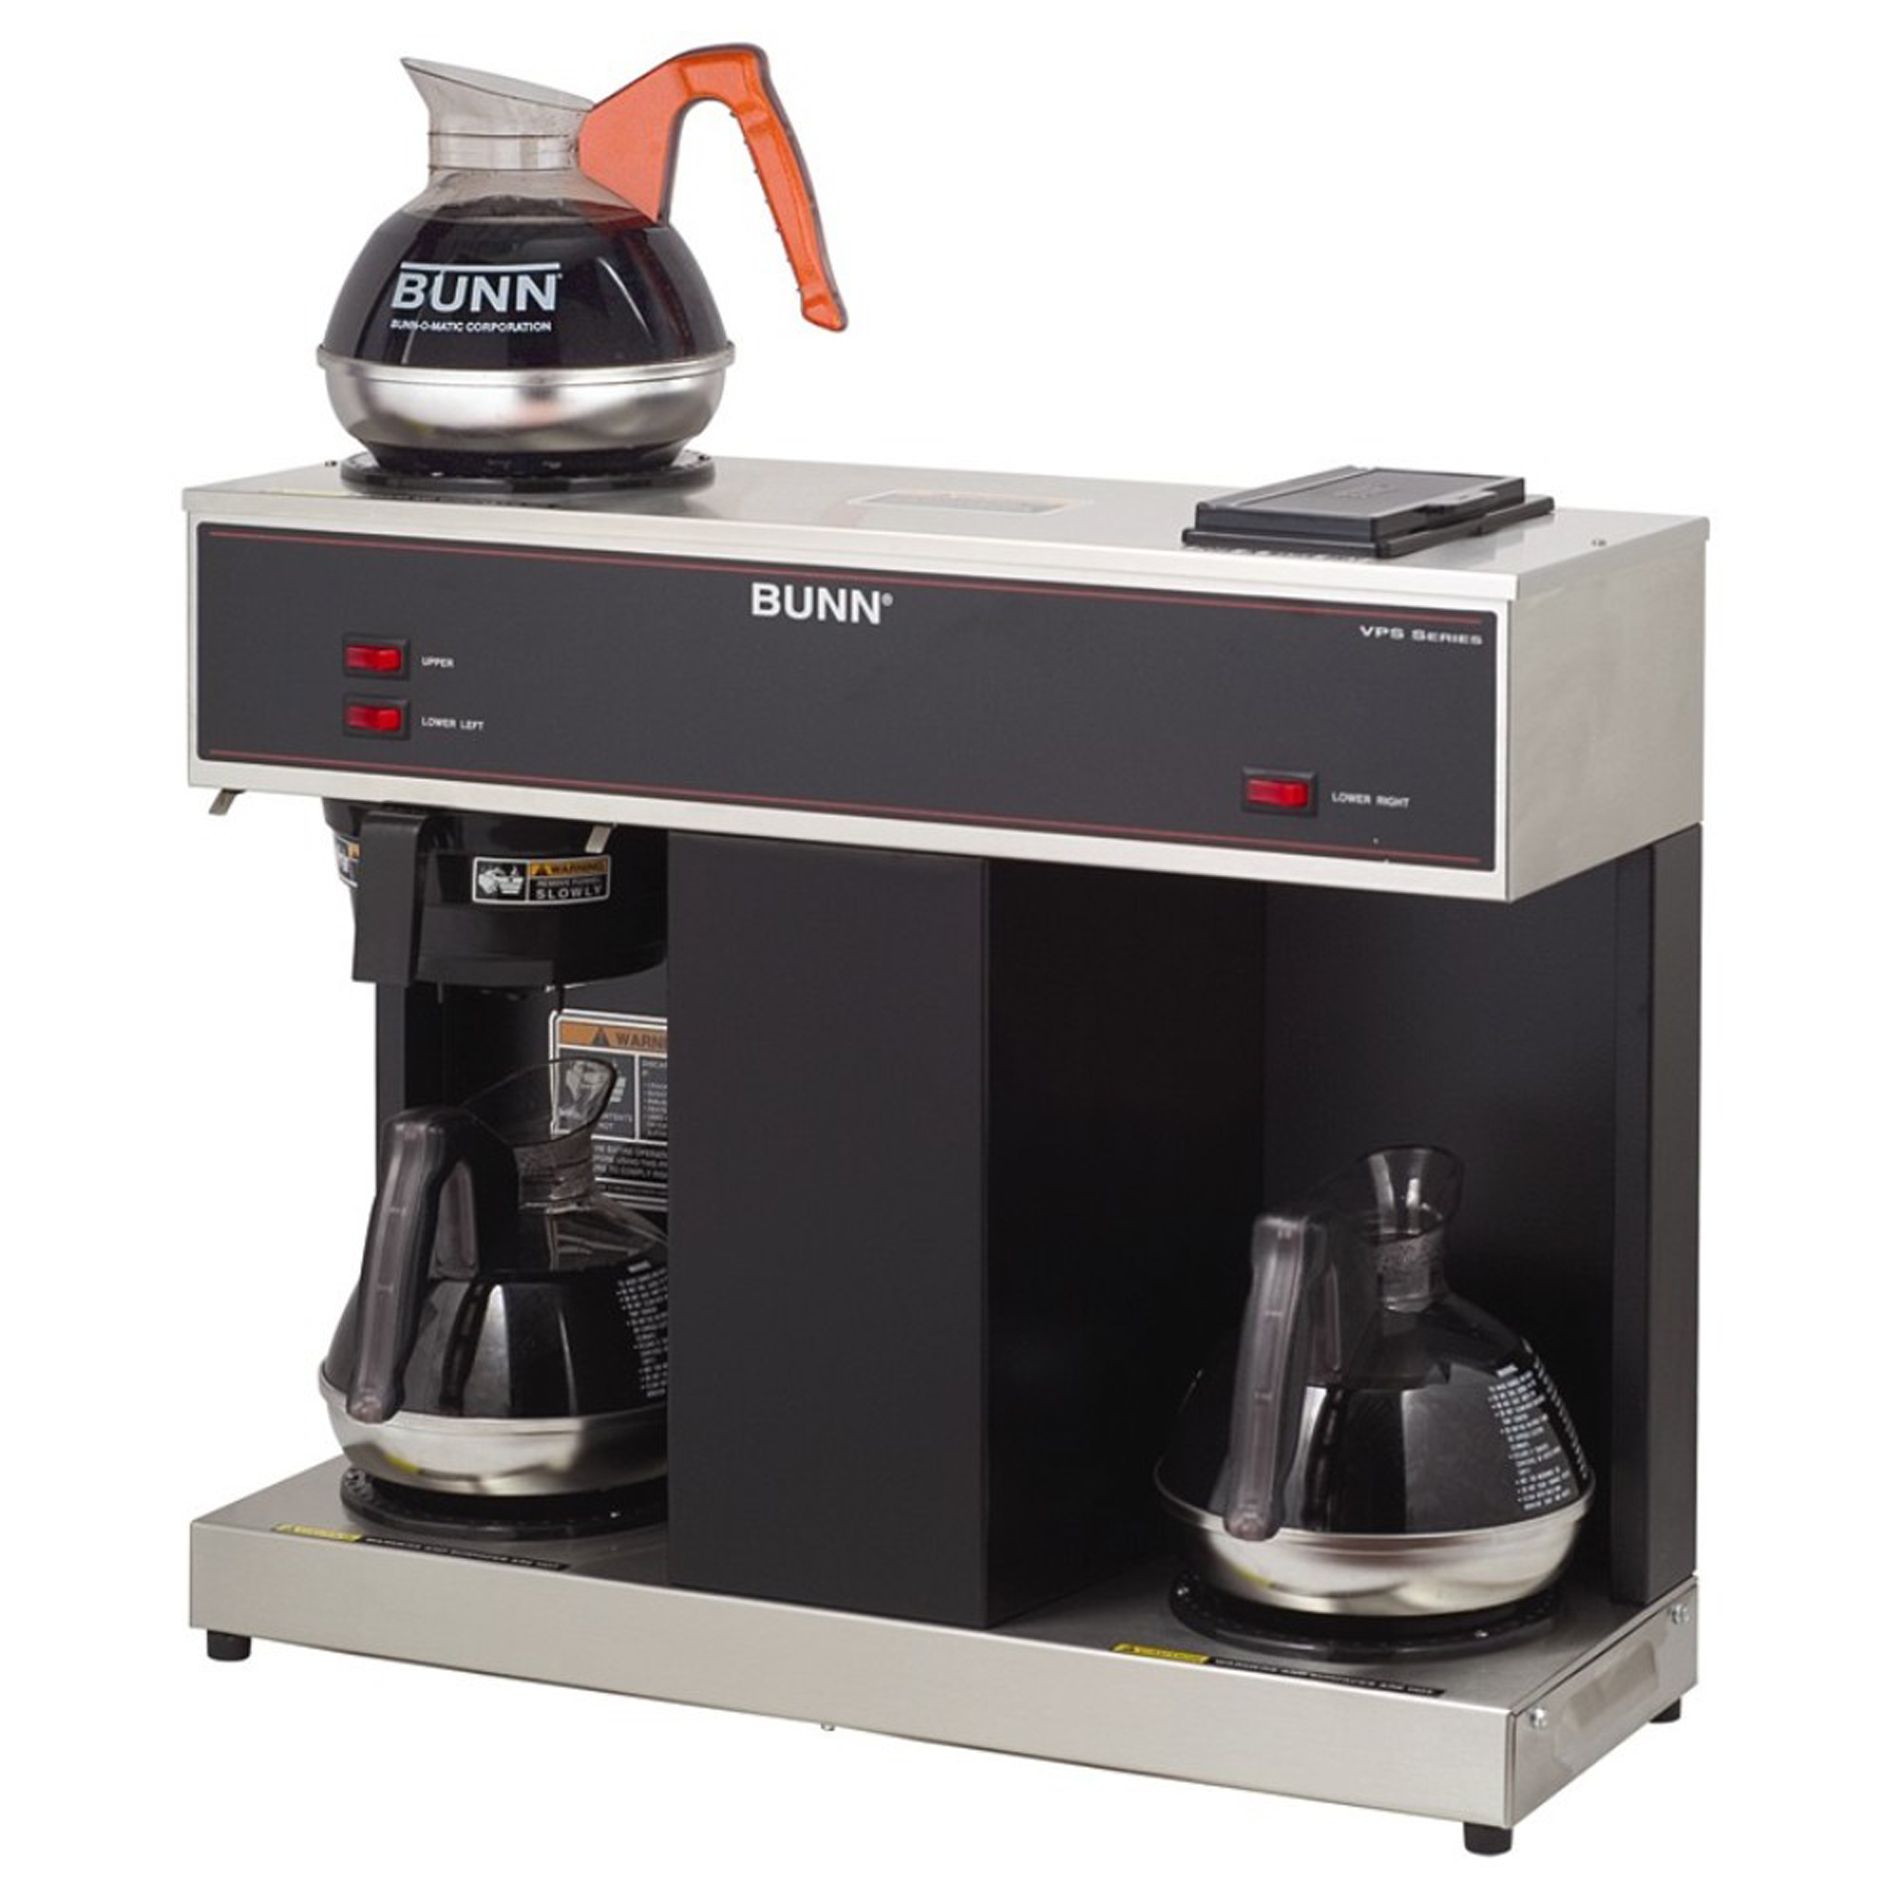 Bunn VPS 12-Cup Pourover Commercial Coffee Brewer with 3 Warmers